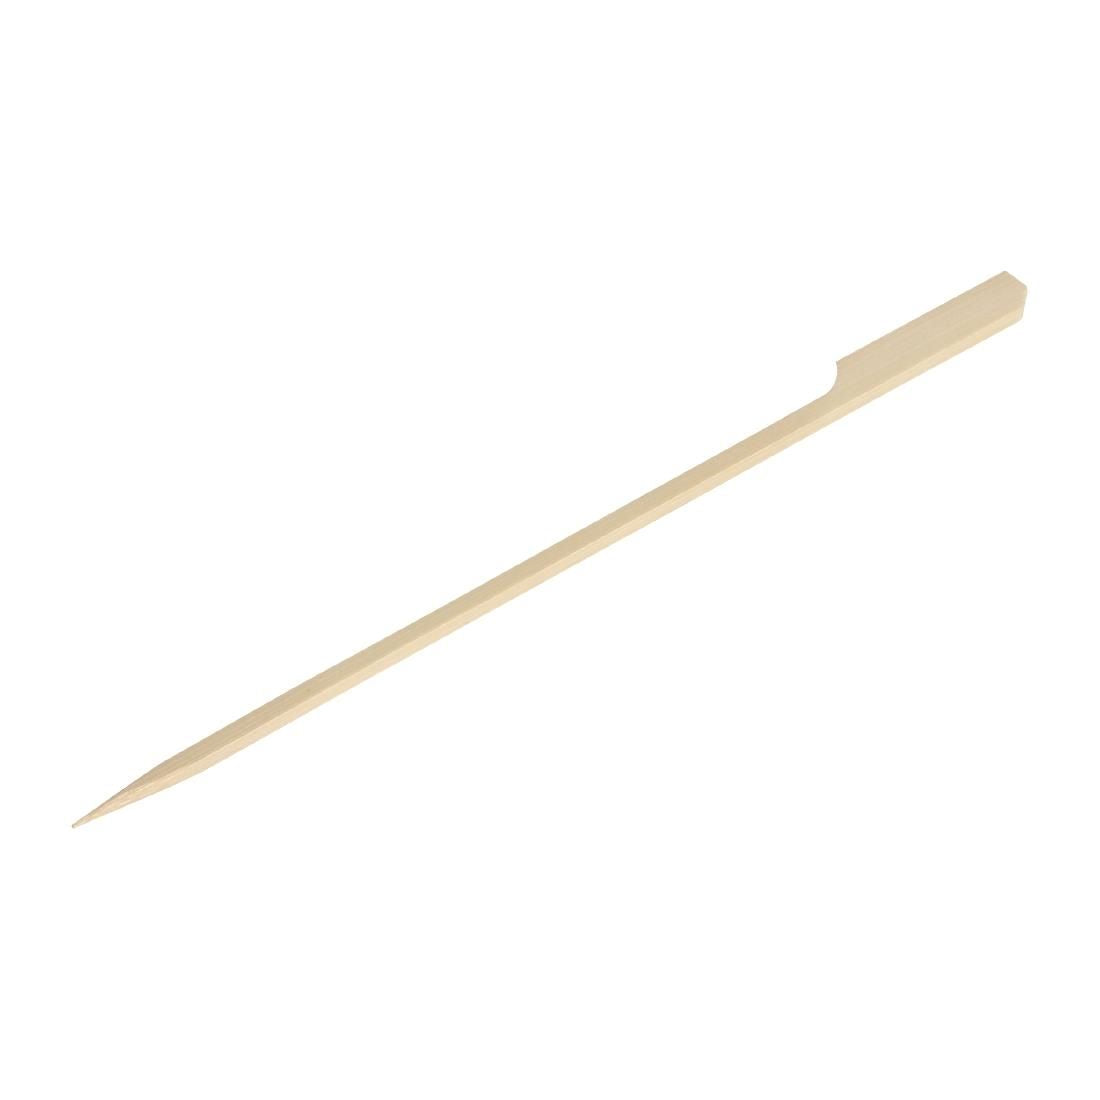 DK395 Fiesta Green Biodegradable Bamboo Paddle Skewers 180mm (Pack of 100) JD Catering Equipment Solutions Ltd